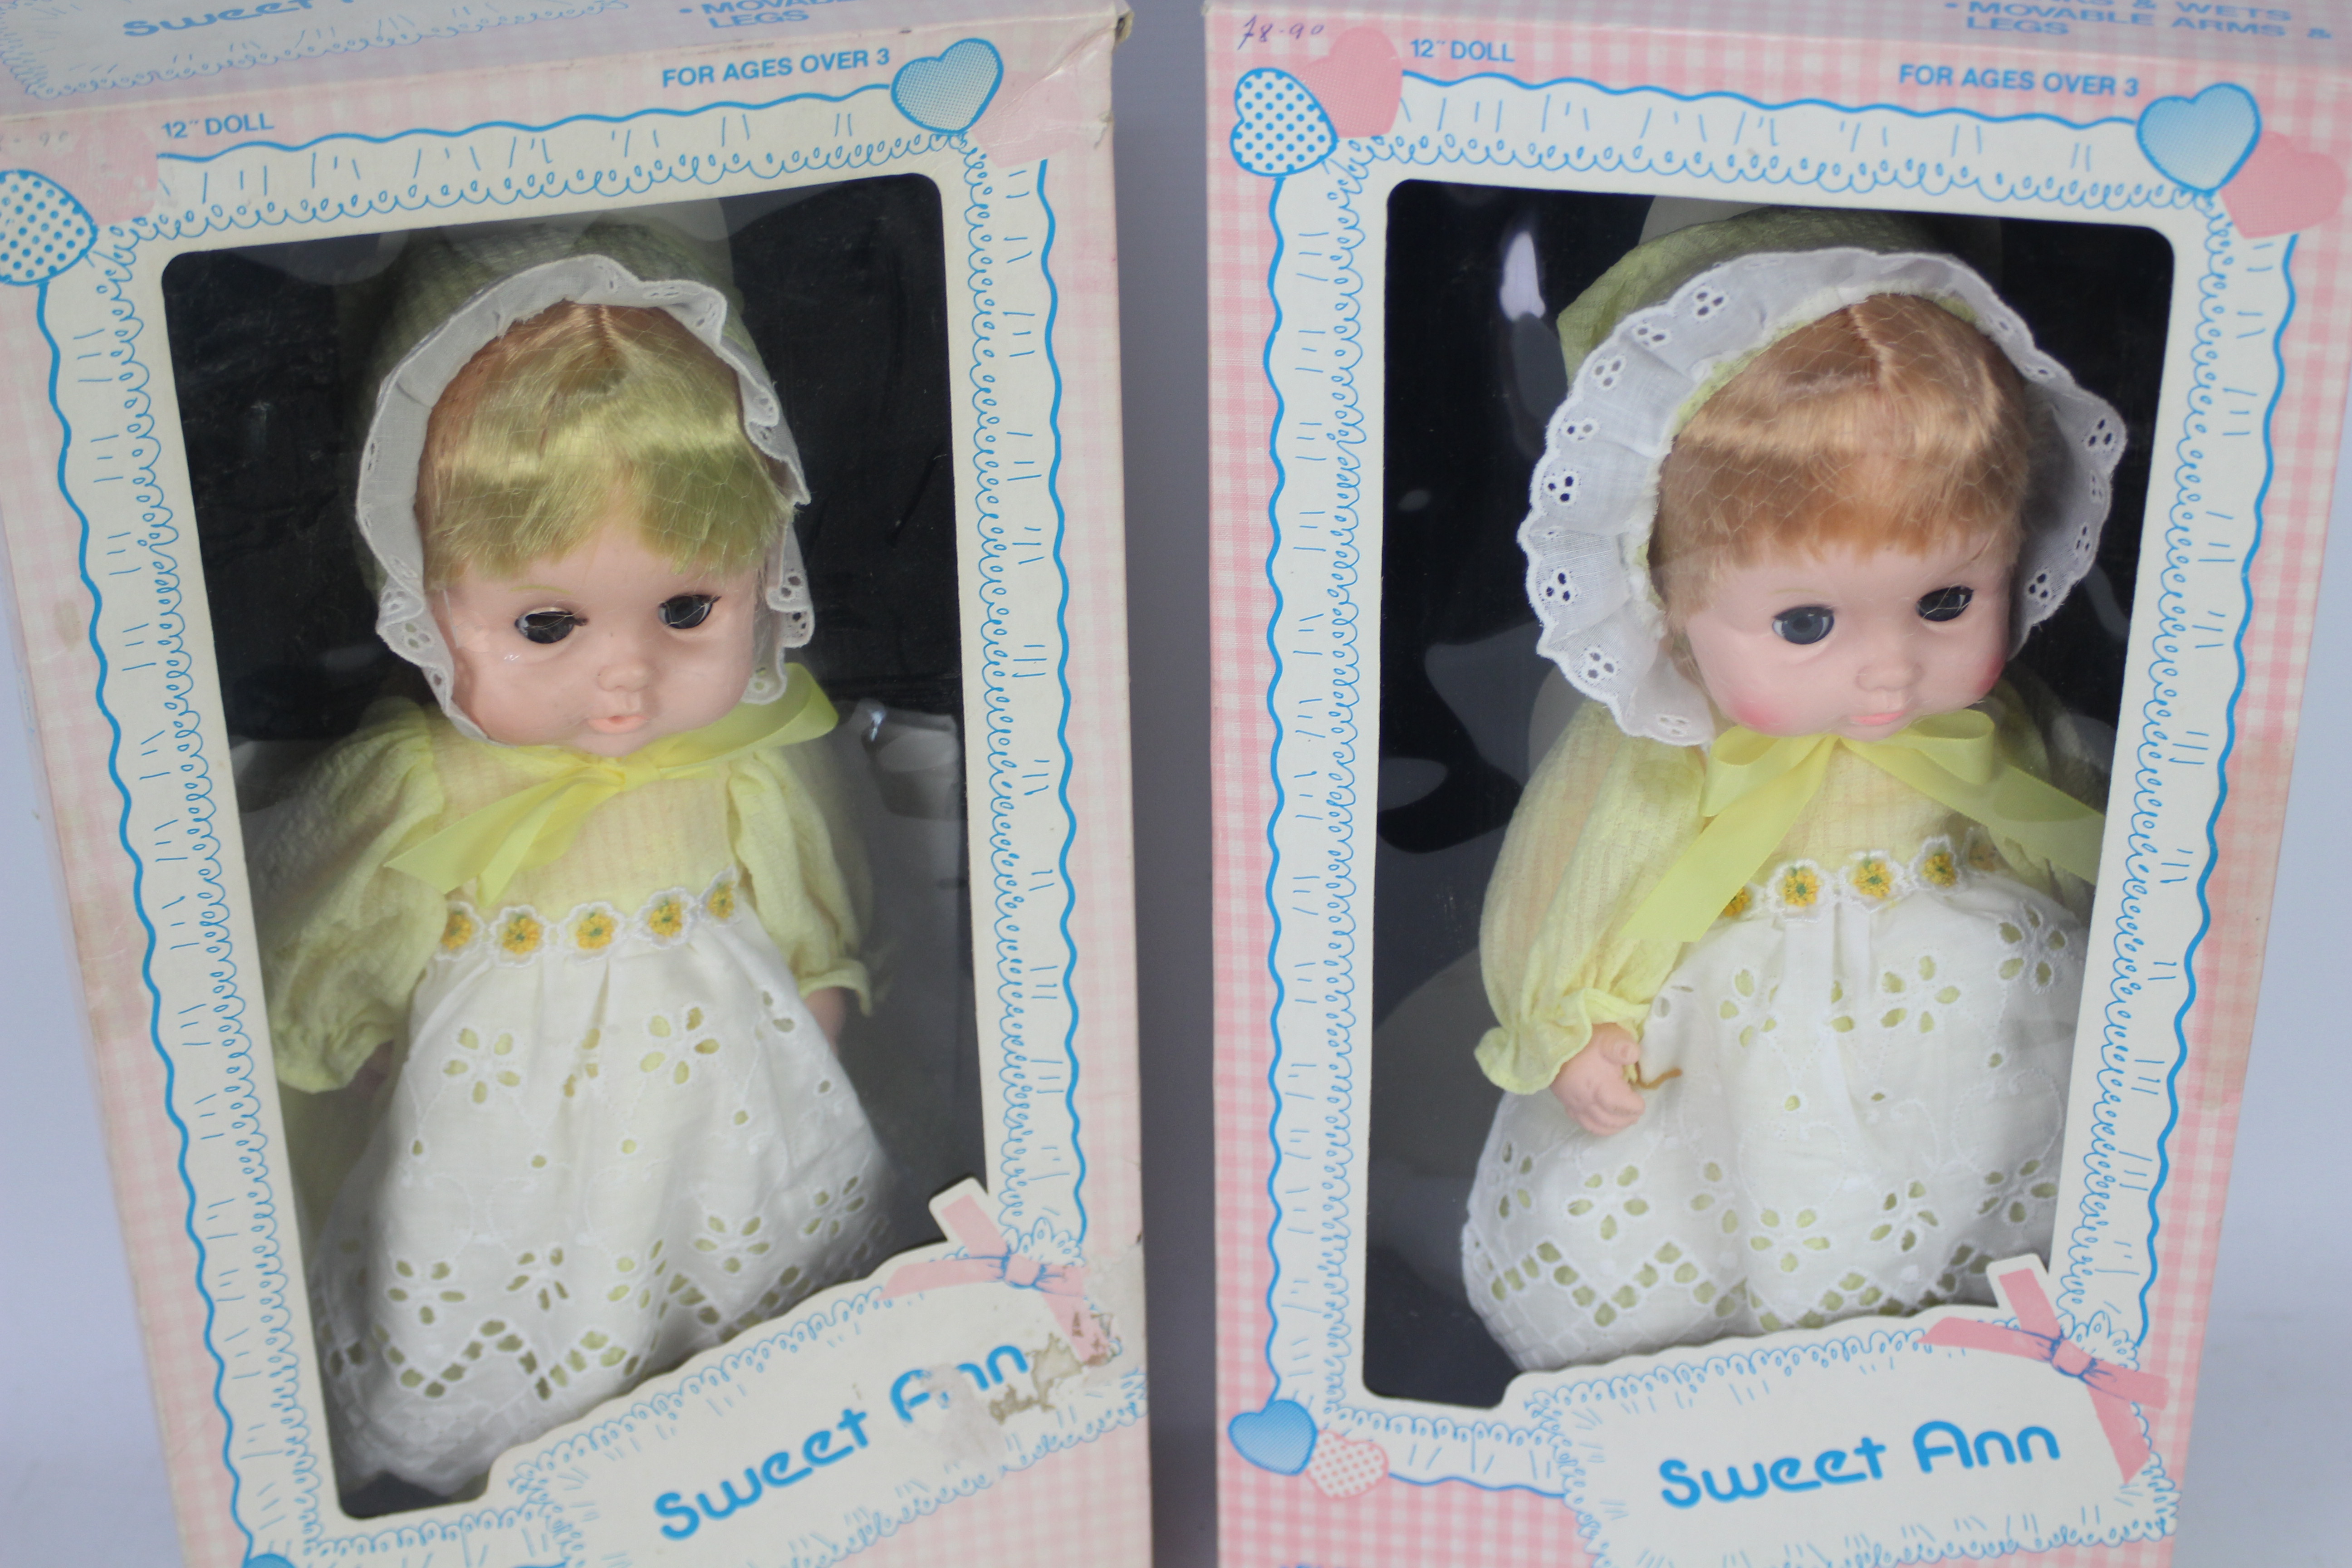 Playmates - Sweet Ann - 2 x boxed Sweet Ann dolls from 1979 # 4122. - Image 2 of 2